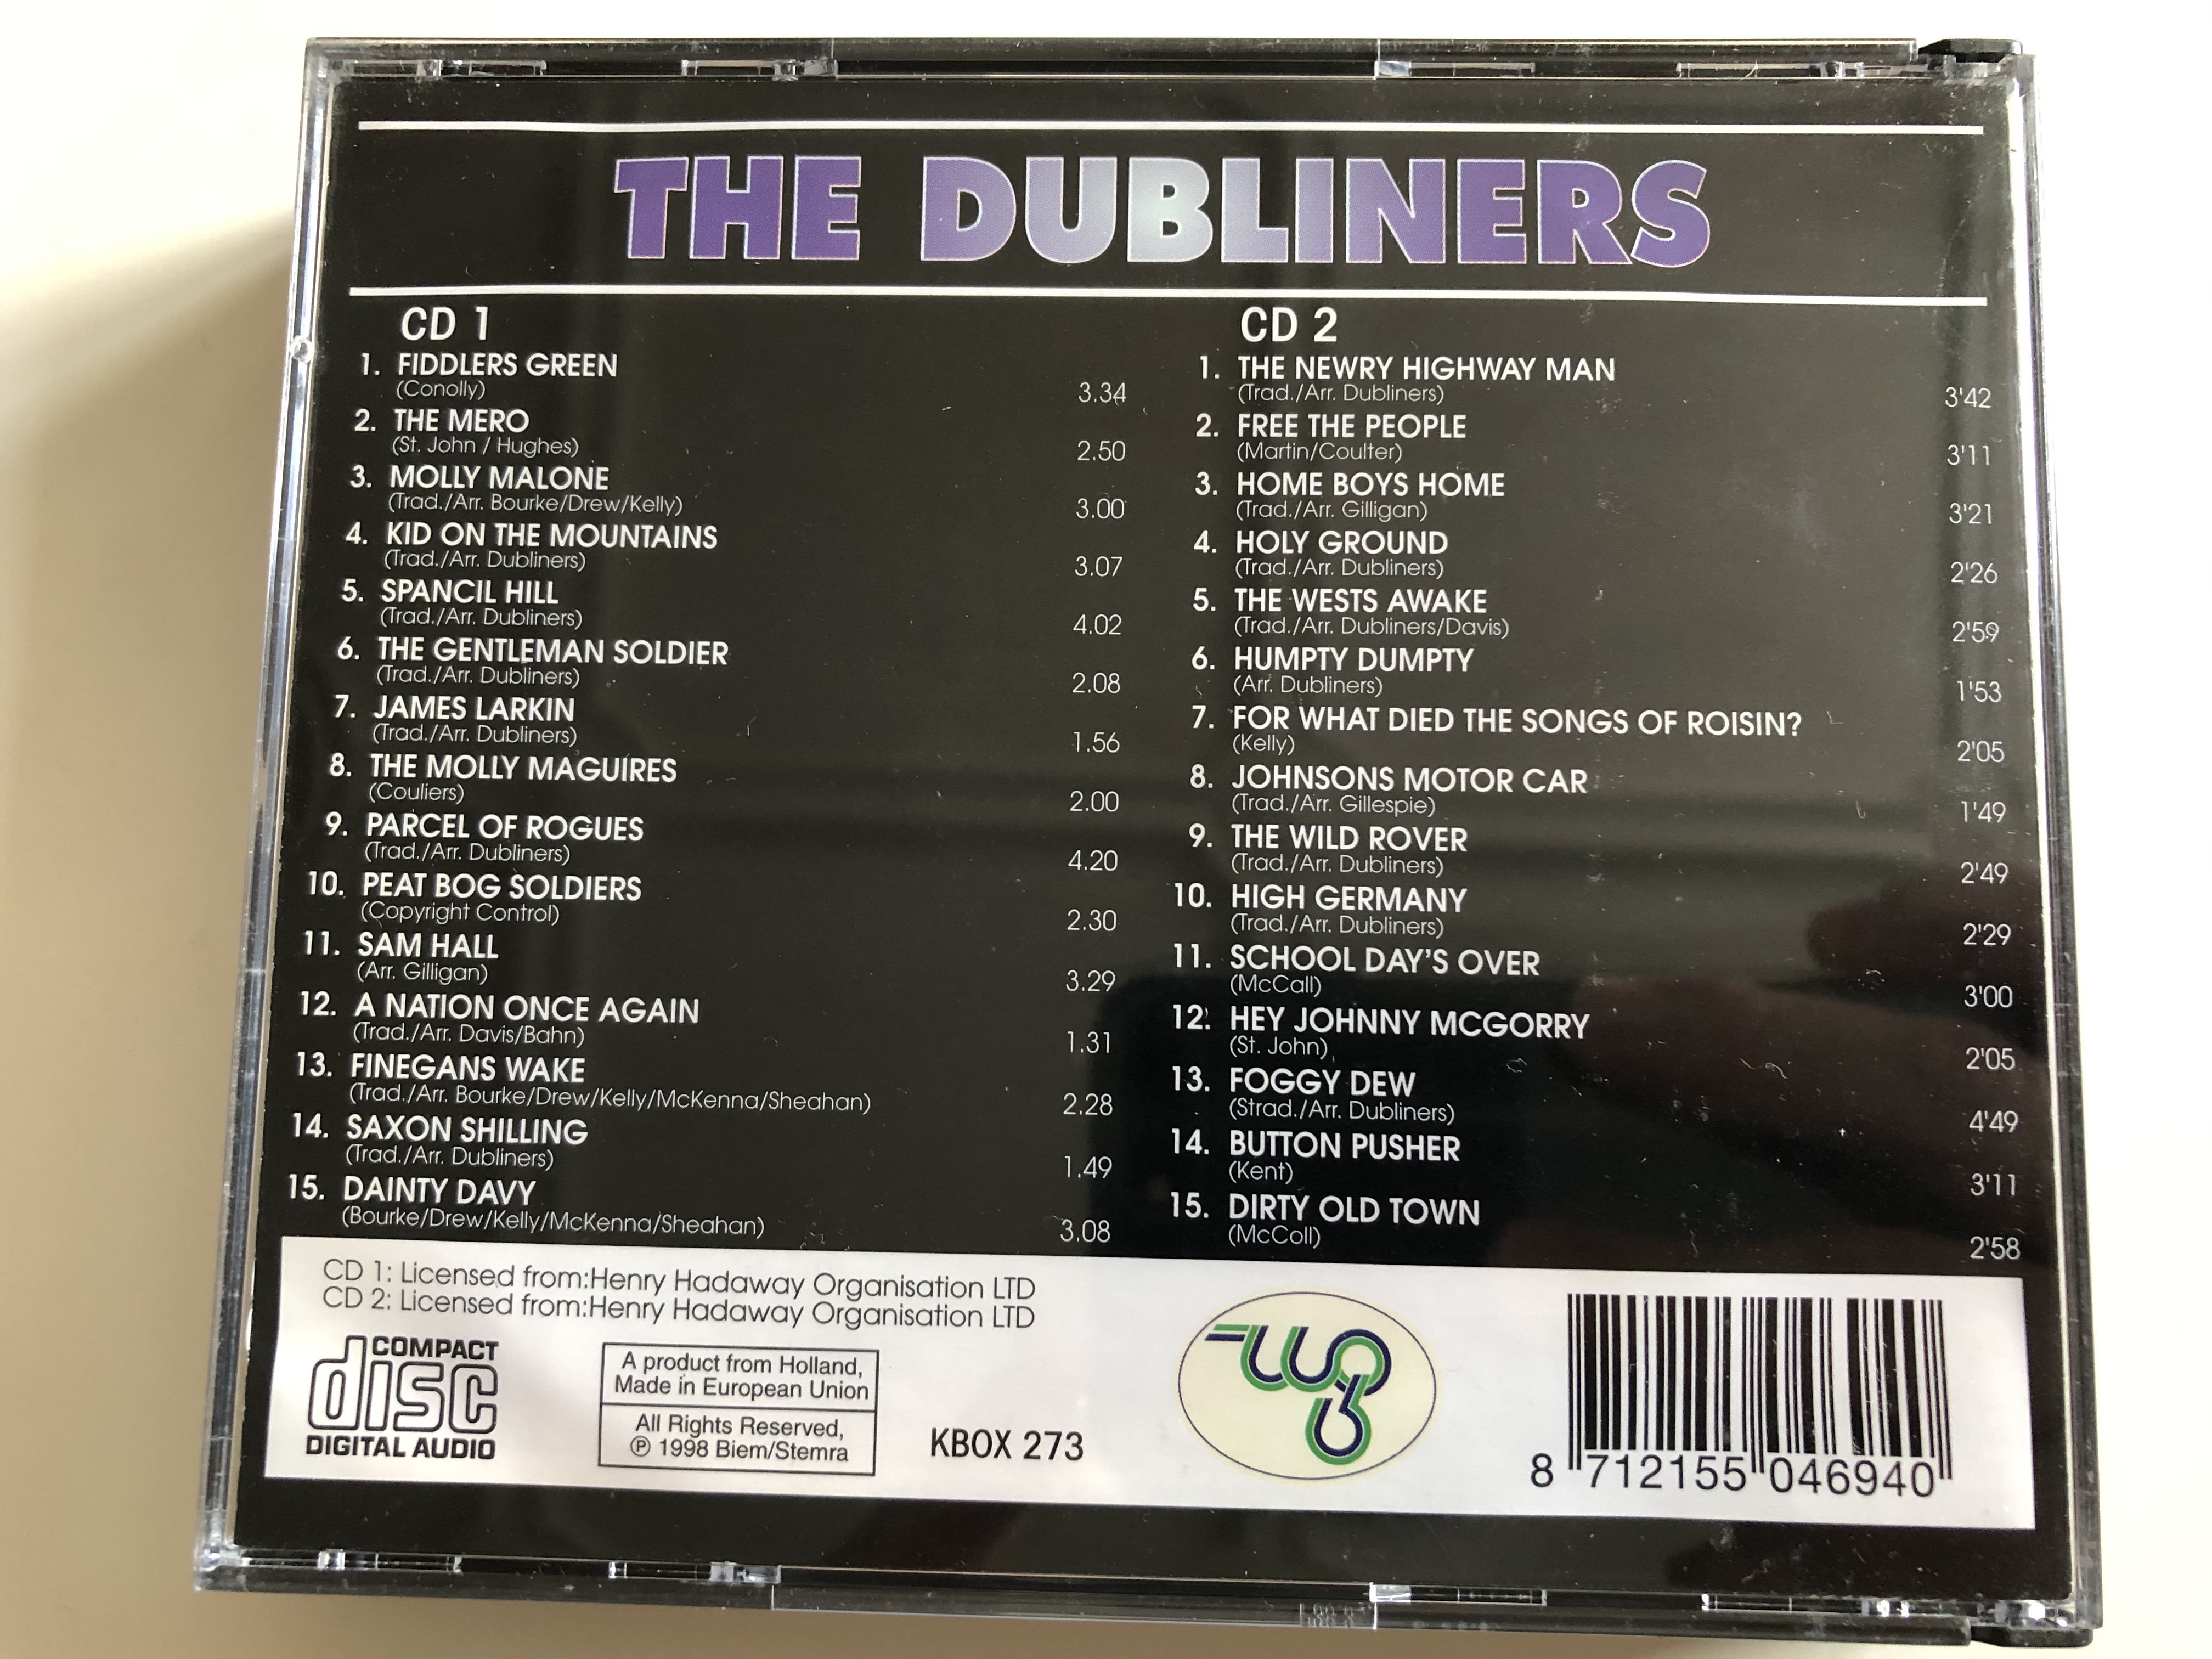 the-dubliners-hey-yohnny-mcgorry-a-nation-once-again-free-the-people-the-wild-rover-spancil-hill-weton-wesgram-2x-audio-cd-1998-kbox-273-4-.jpg